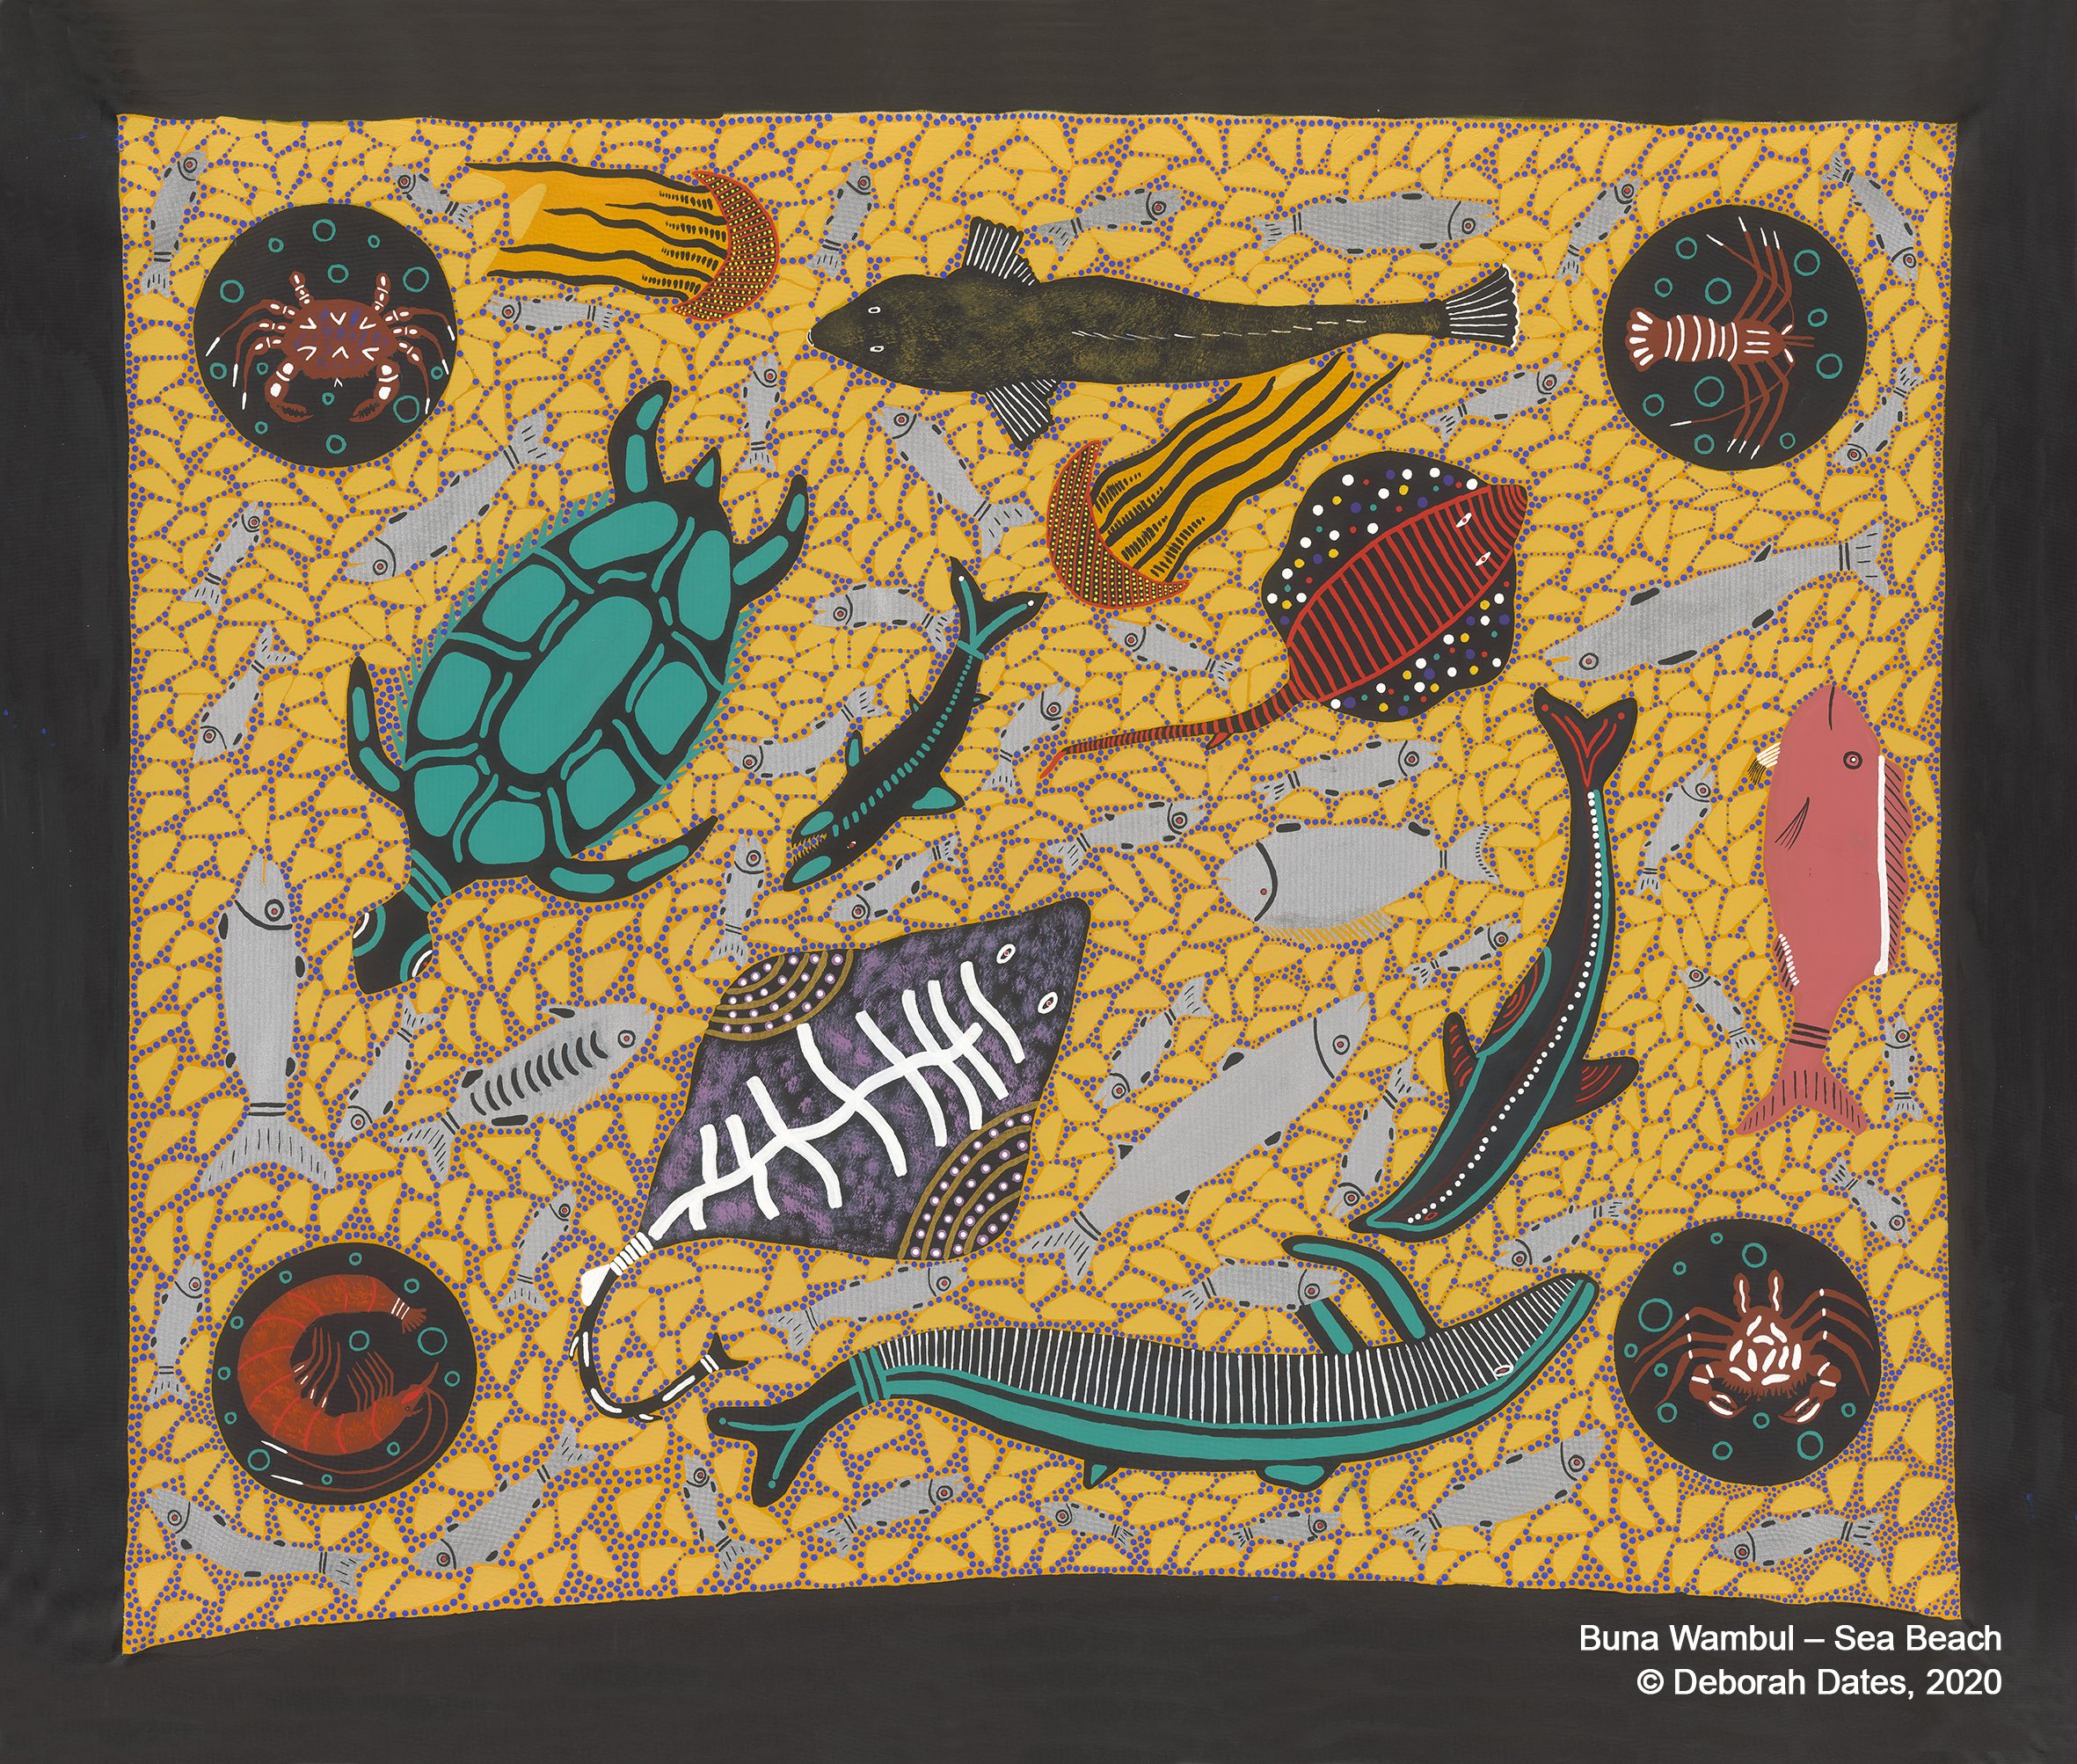 The artwork illustrates Sea Country animals of cultural significance or those identified as totems